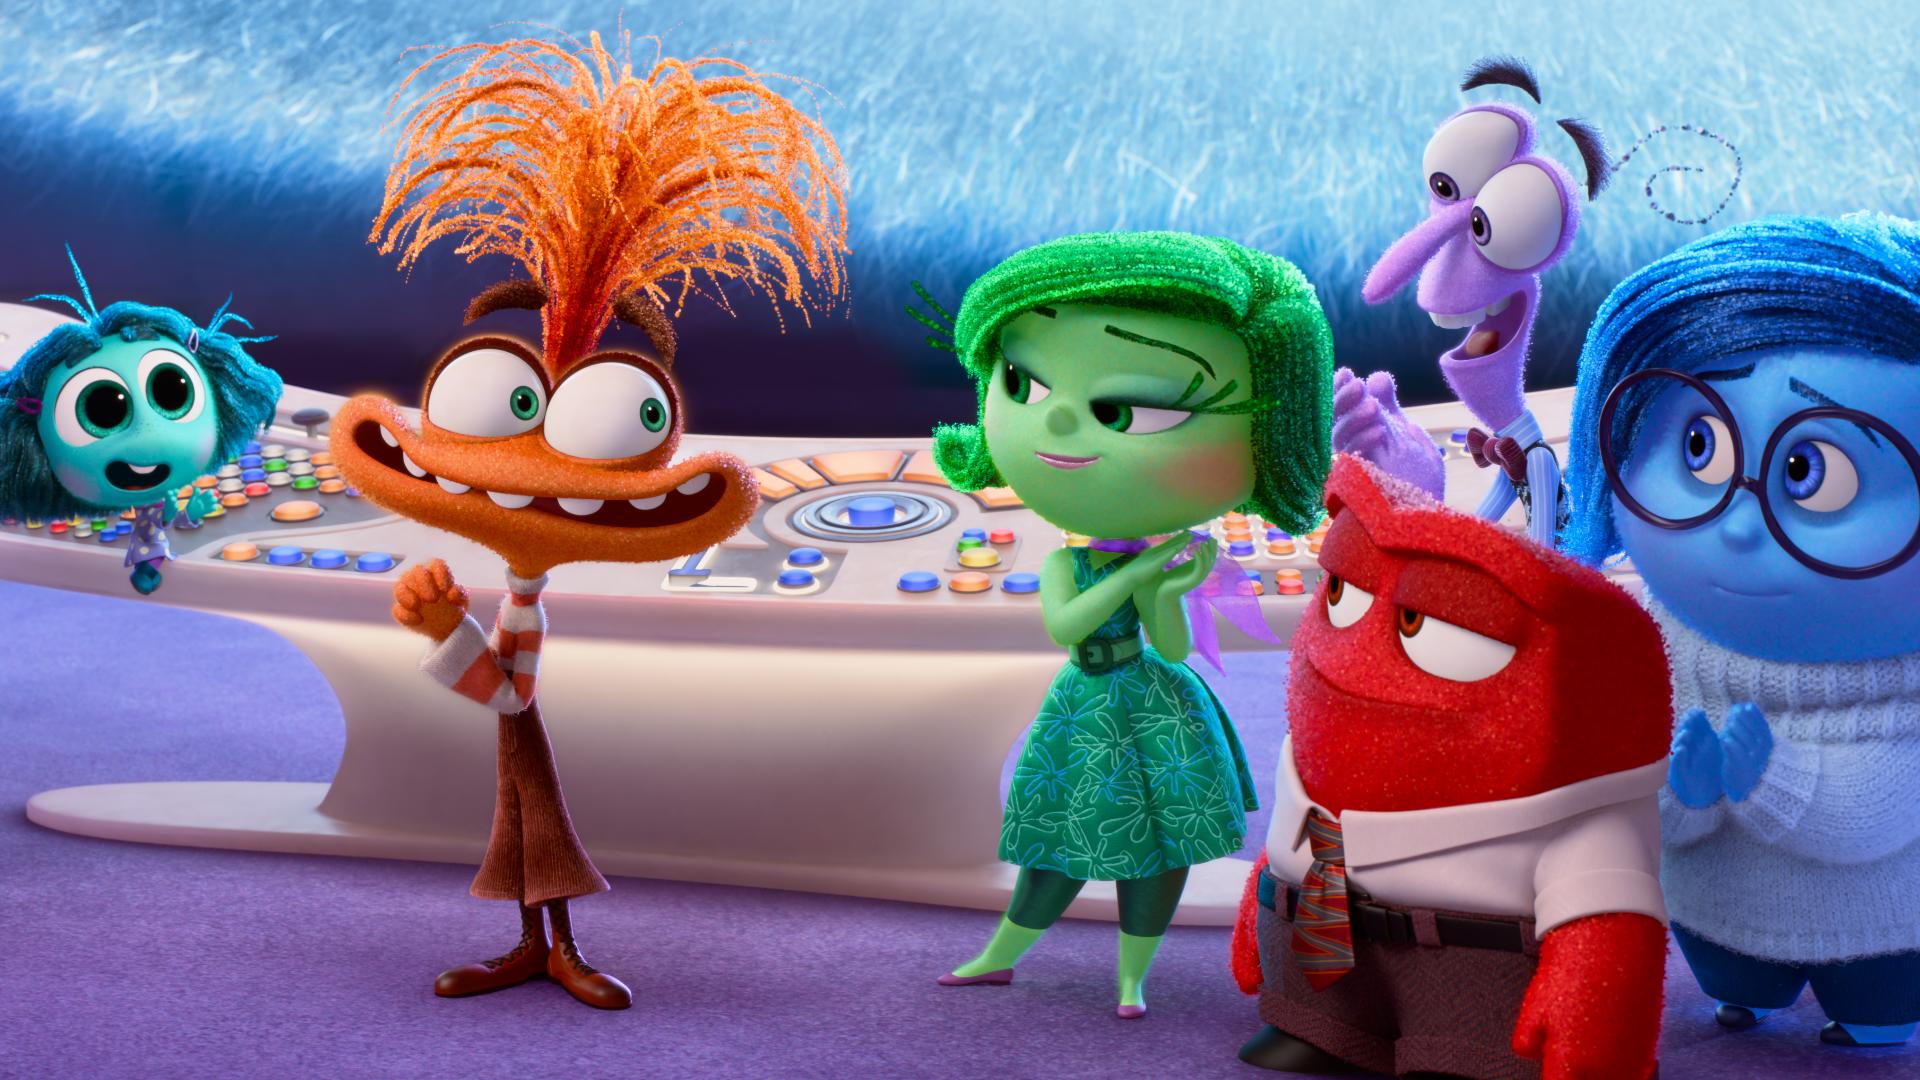 Inside Out 2 movie review: Peace and